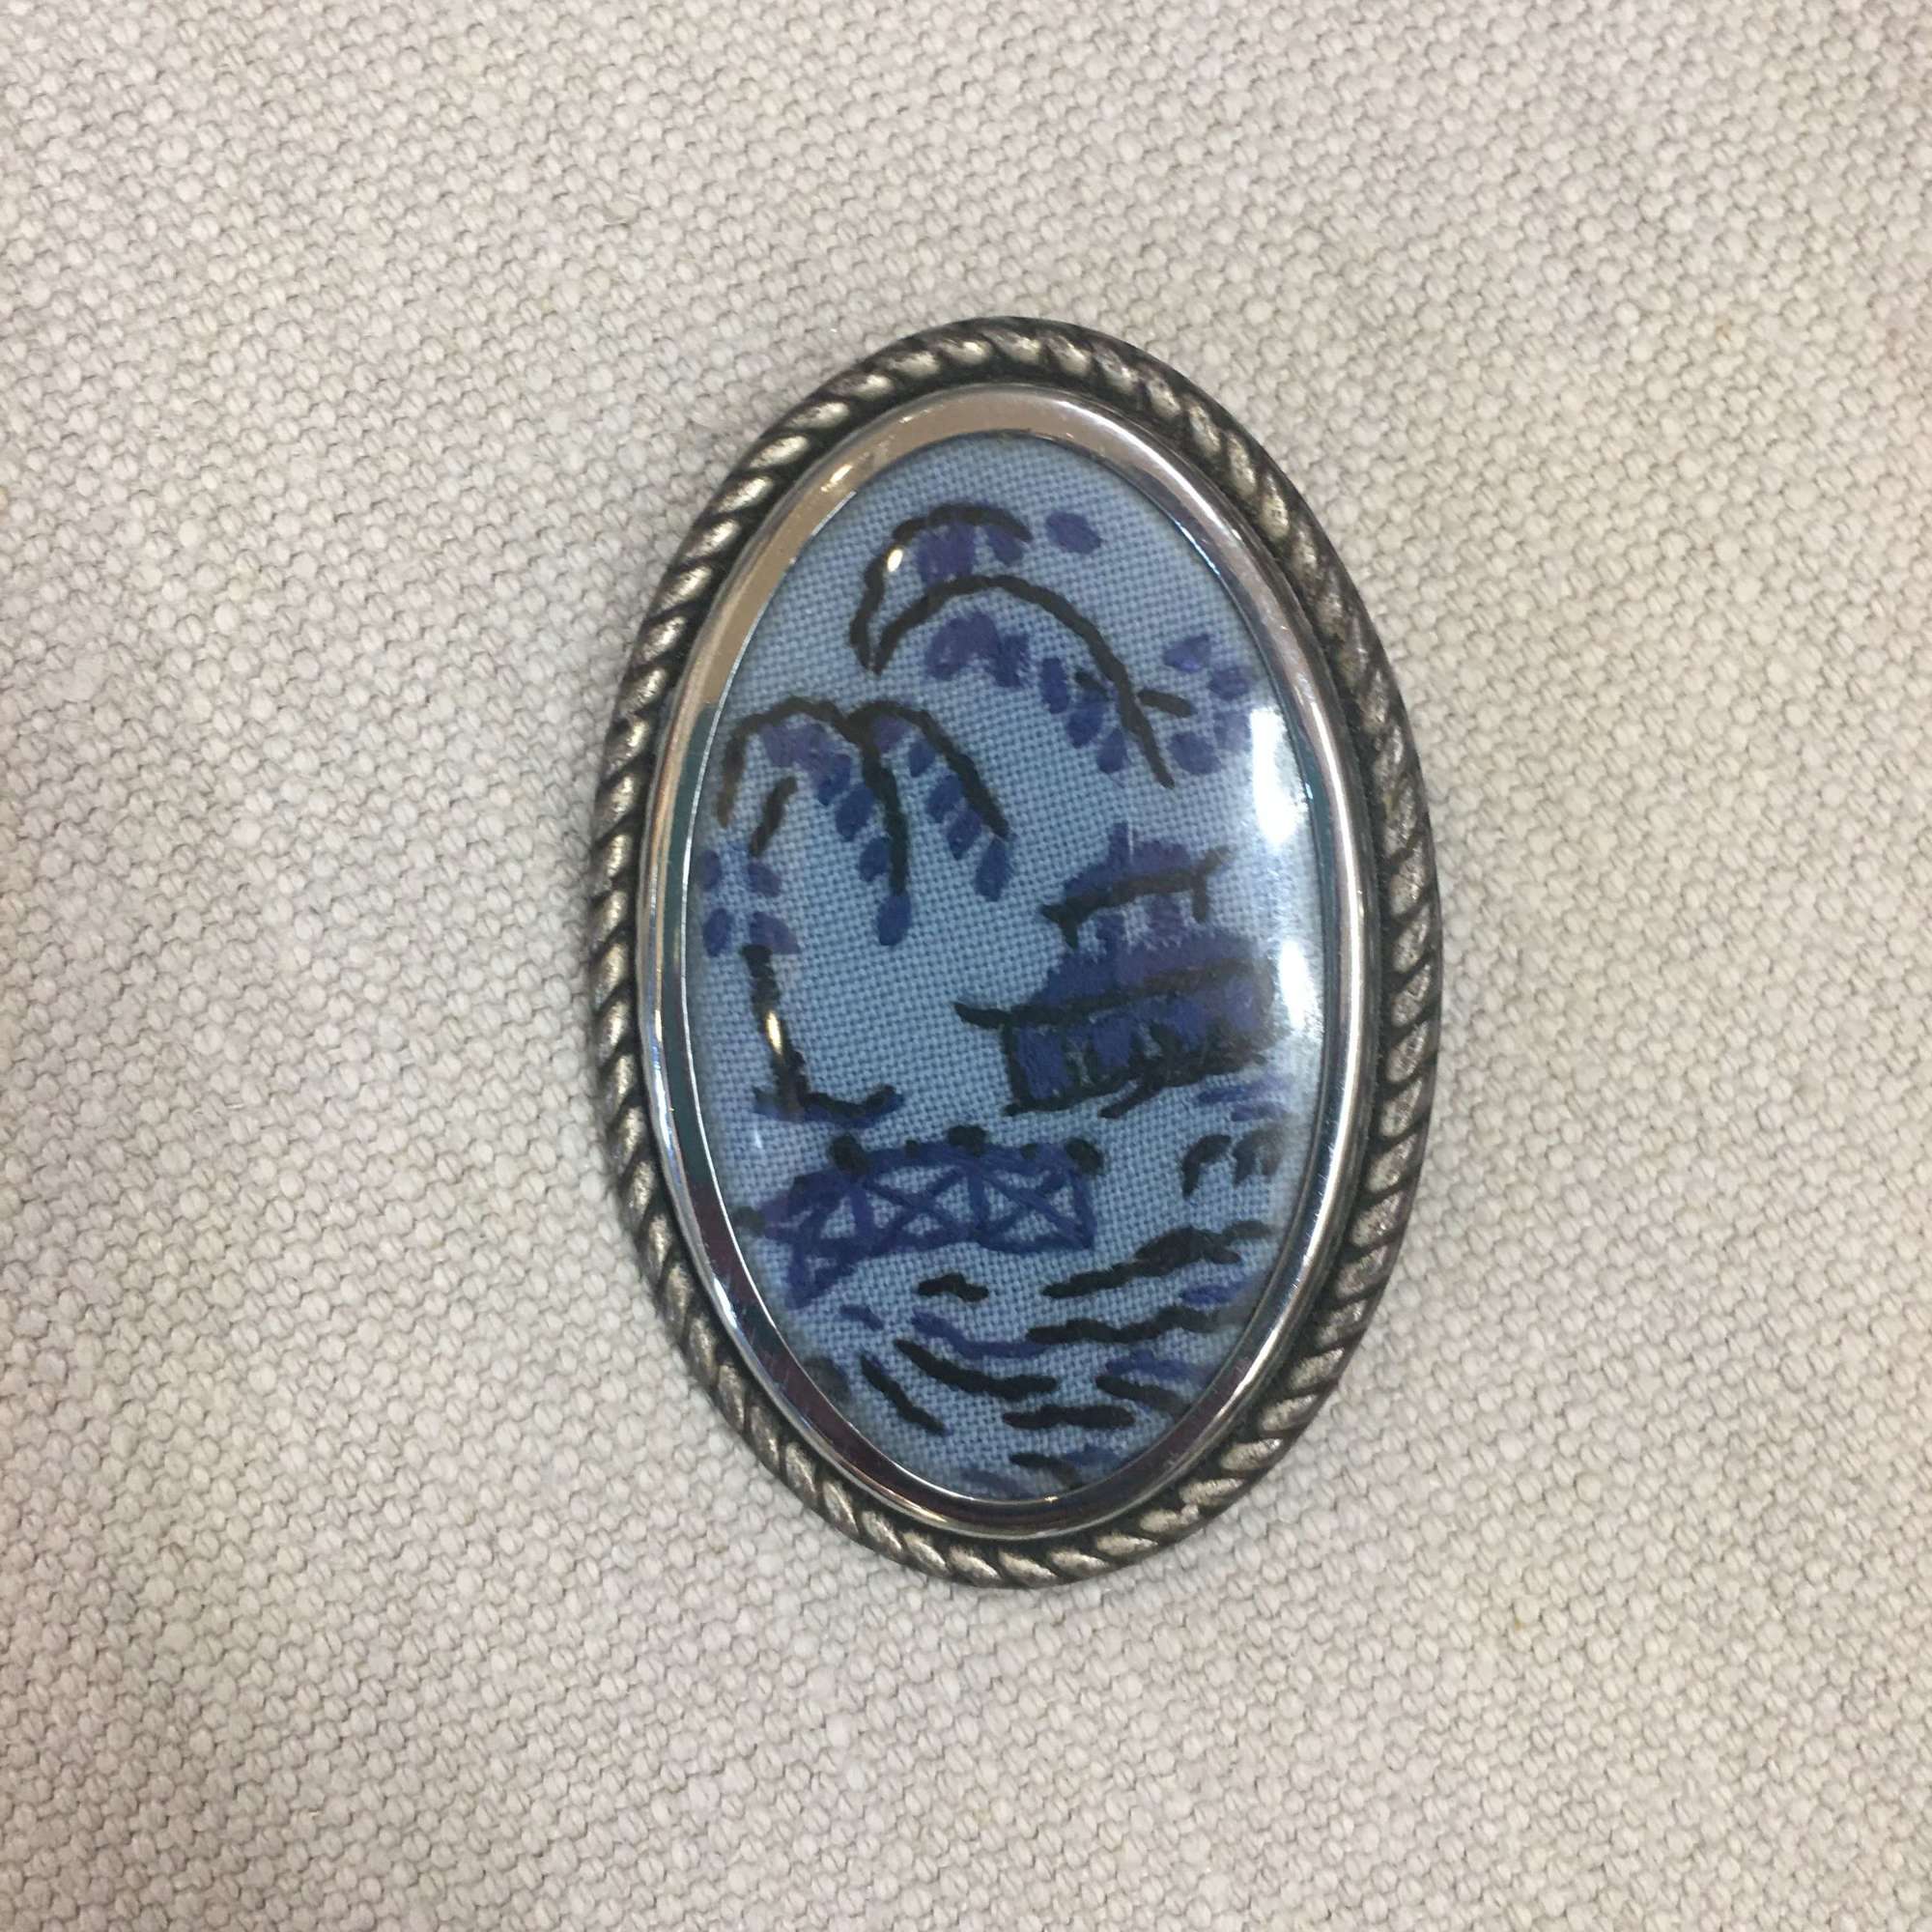 1950s hand embroidered blue willow pattern oval brooch